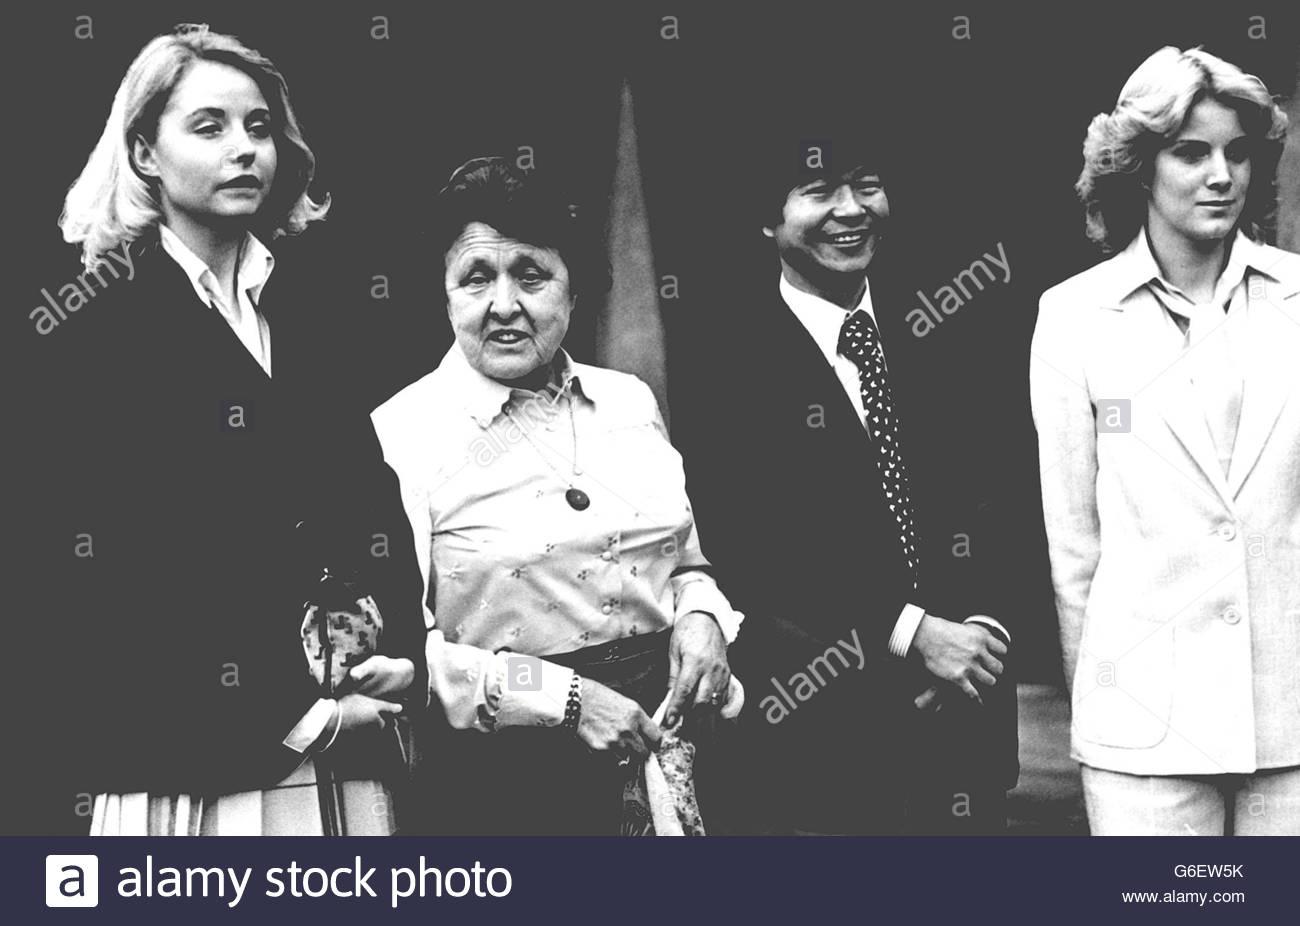 Kathy Miller (right), the 15-year-old American schoolgirl who won last year's International Award for Valour in Sport, at Guidhall in the City of London. On left is Kristina Tenshult, girlfriend of the late Swedish racing driver Gunnar Nilsson, who died of cancer in October and Mrs Elizabeth Nilsson (his mother). Centre is Naomi Uemura, the Japanese explorer who became the first man to reach the North Pole alone. 22 February, 1979.